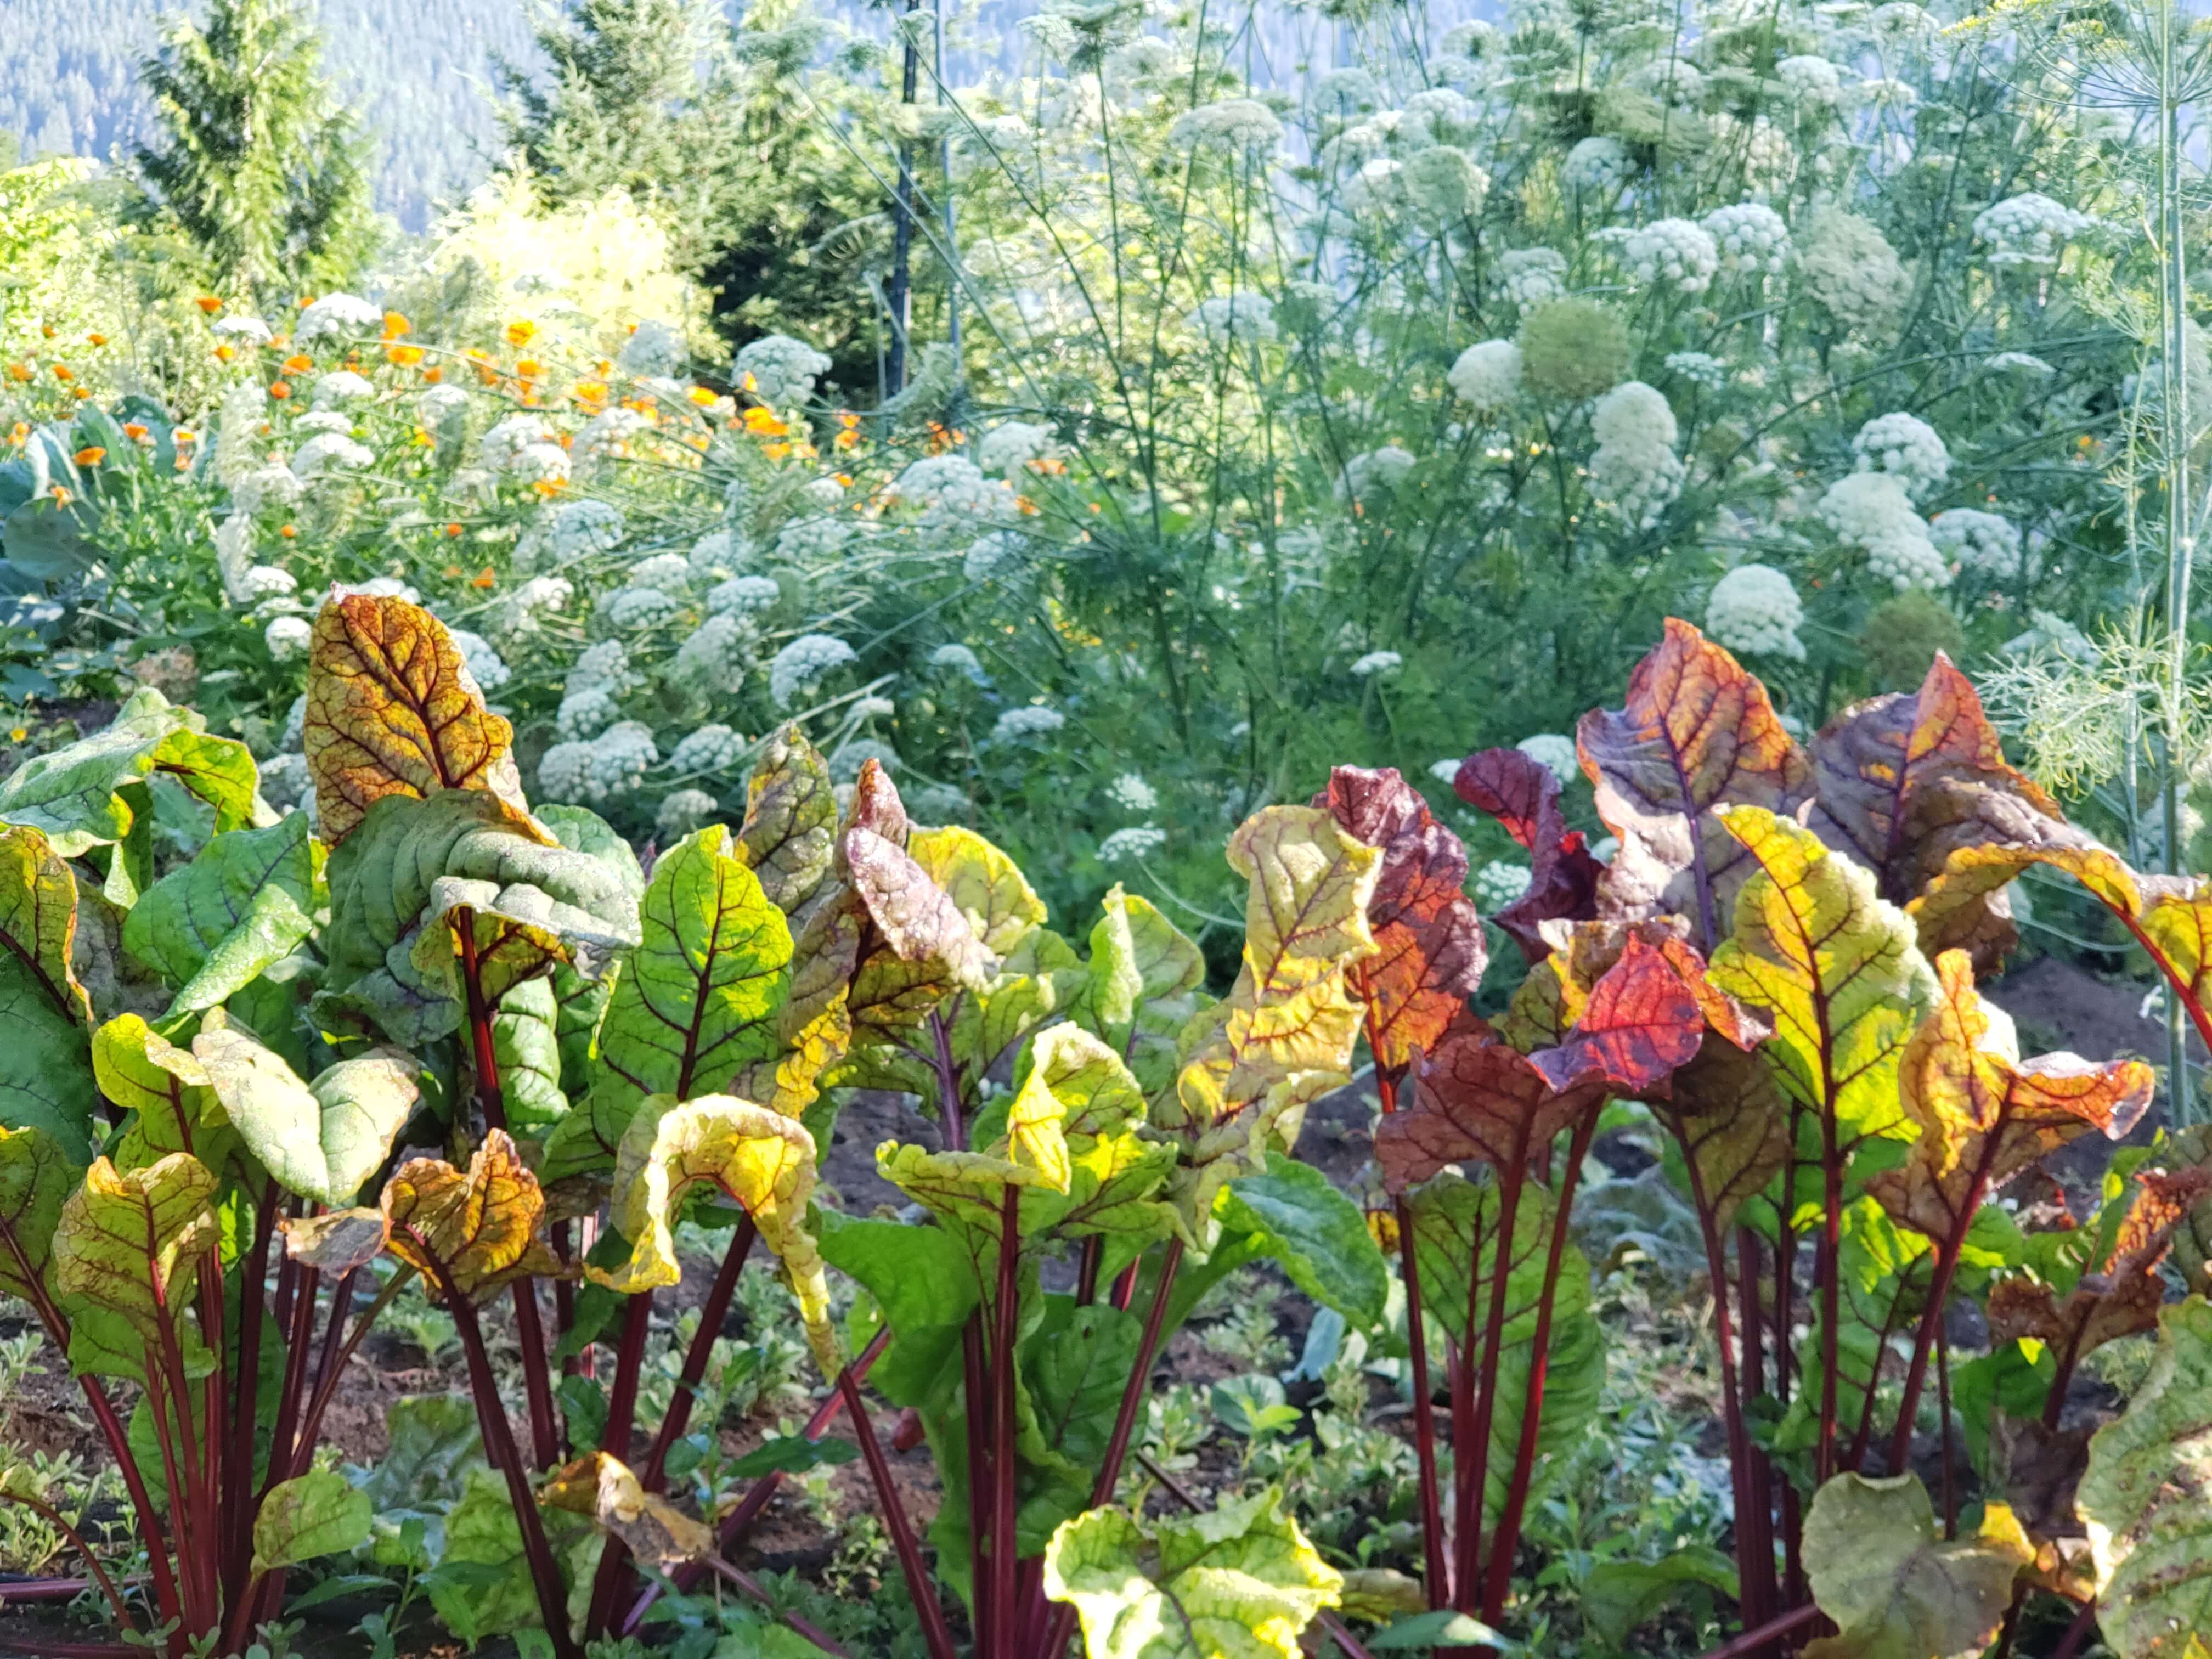 Image of a garden and a row of beets.